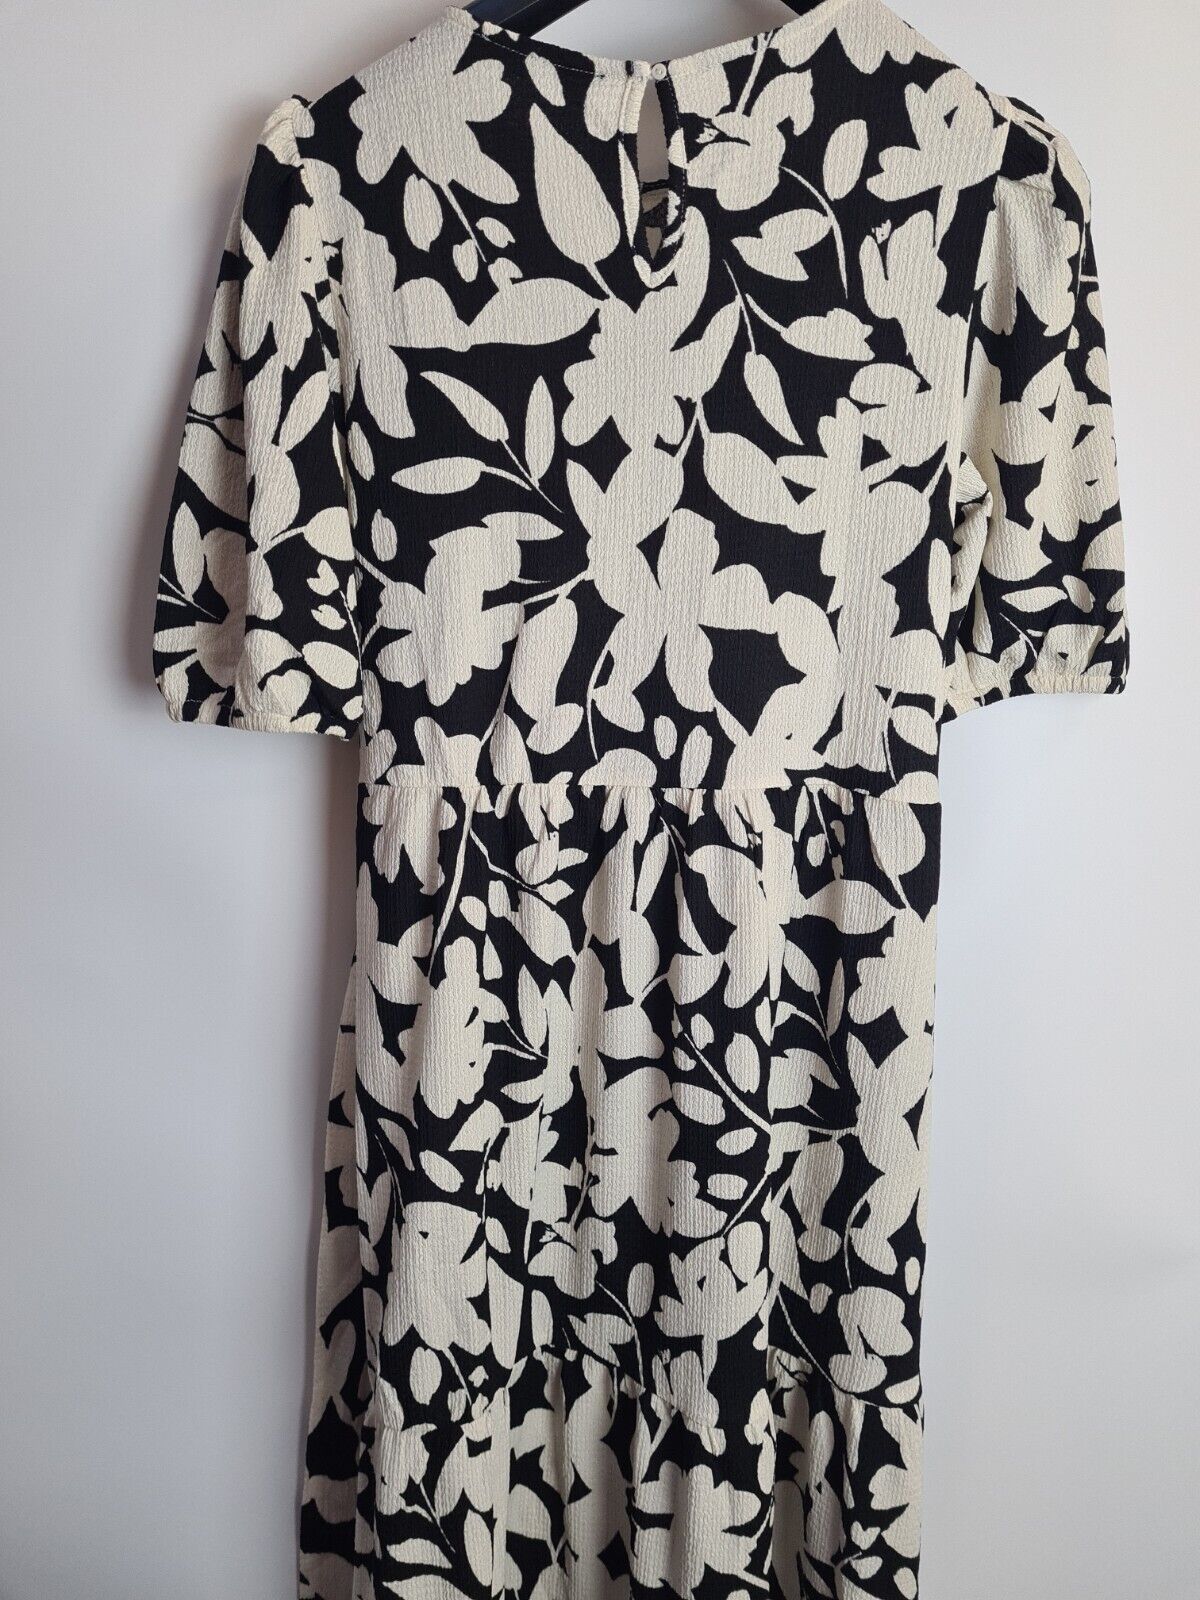 Womens Black And White Floral Tie Waist Dress Size 14 **** V298